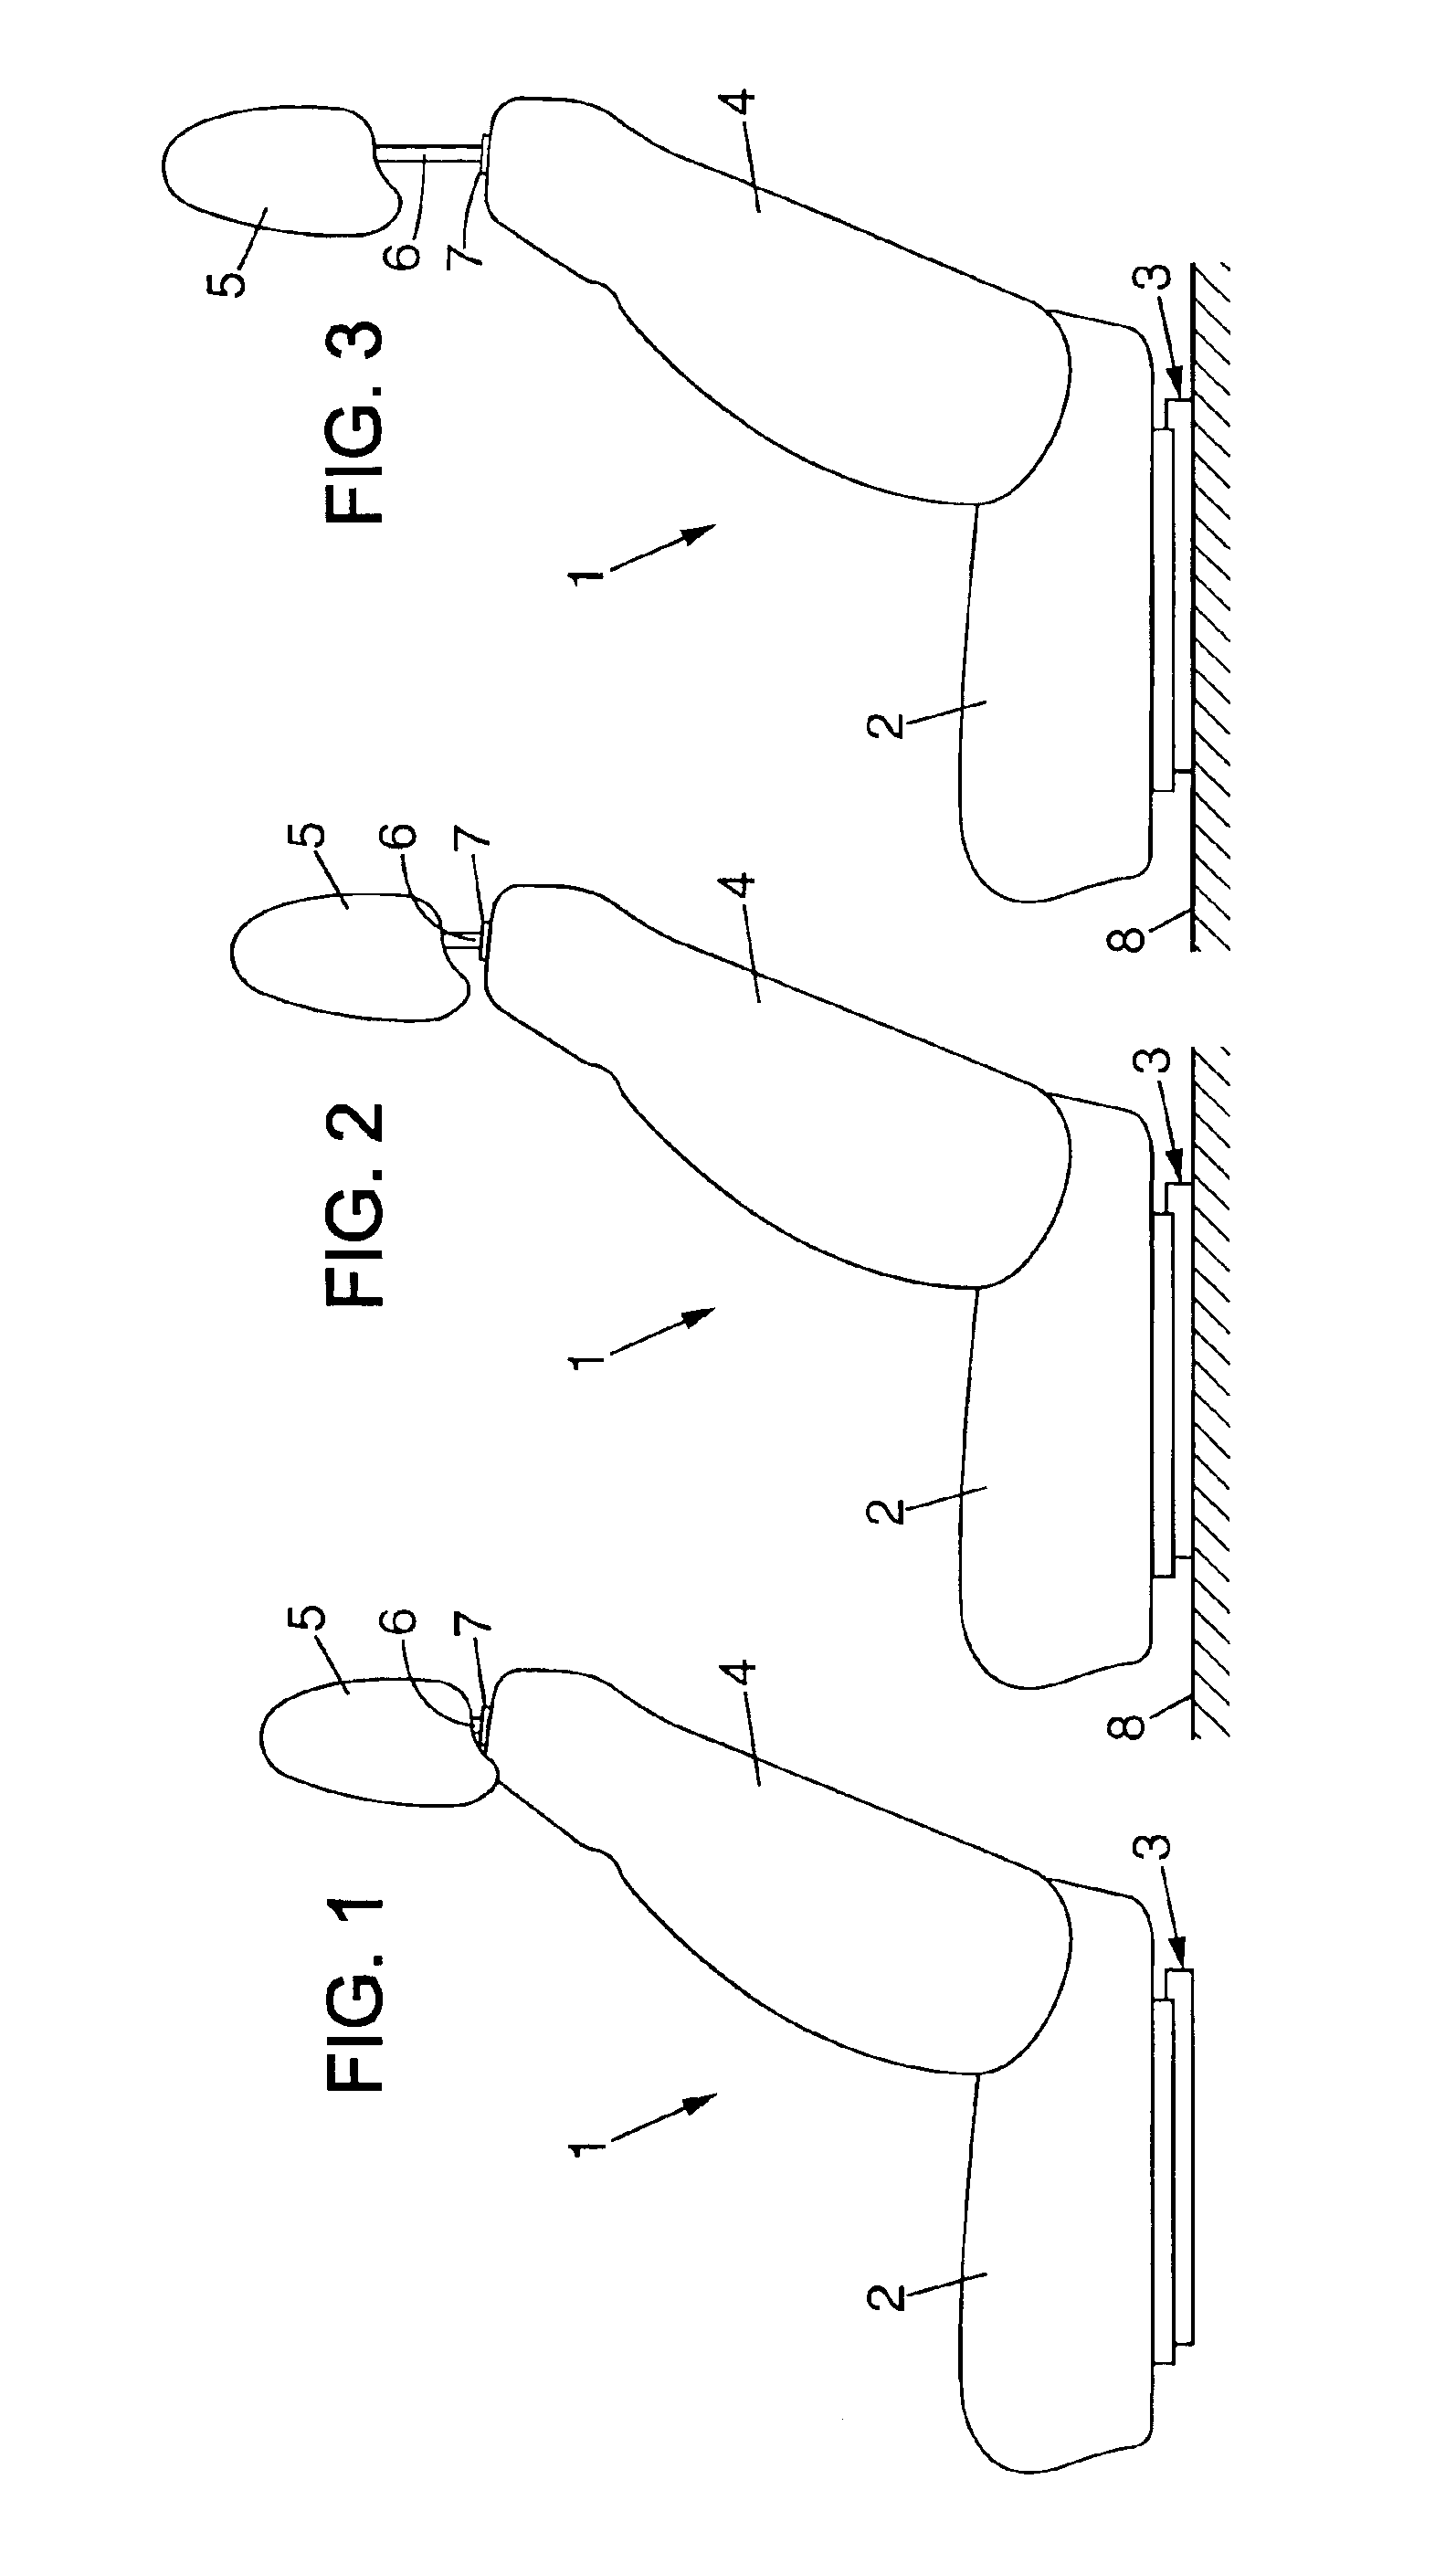 Headrest device for a vehicle seat, and a vehicle seat including such a device